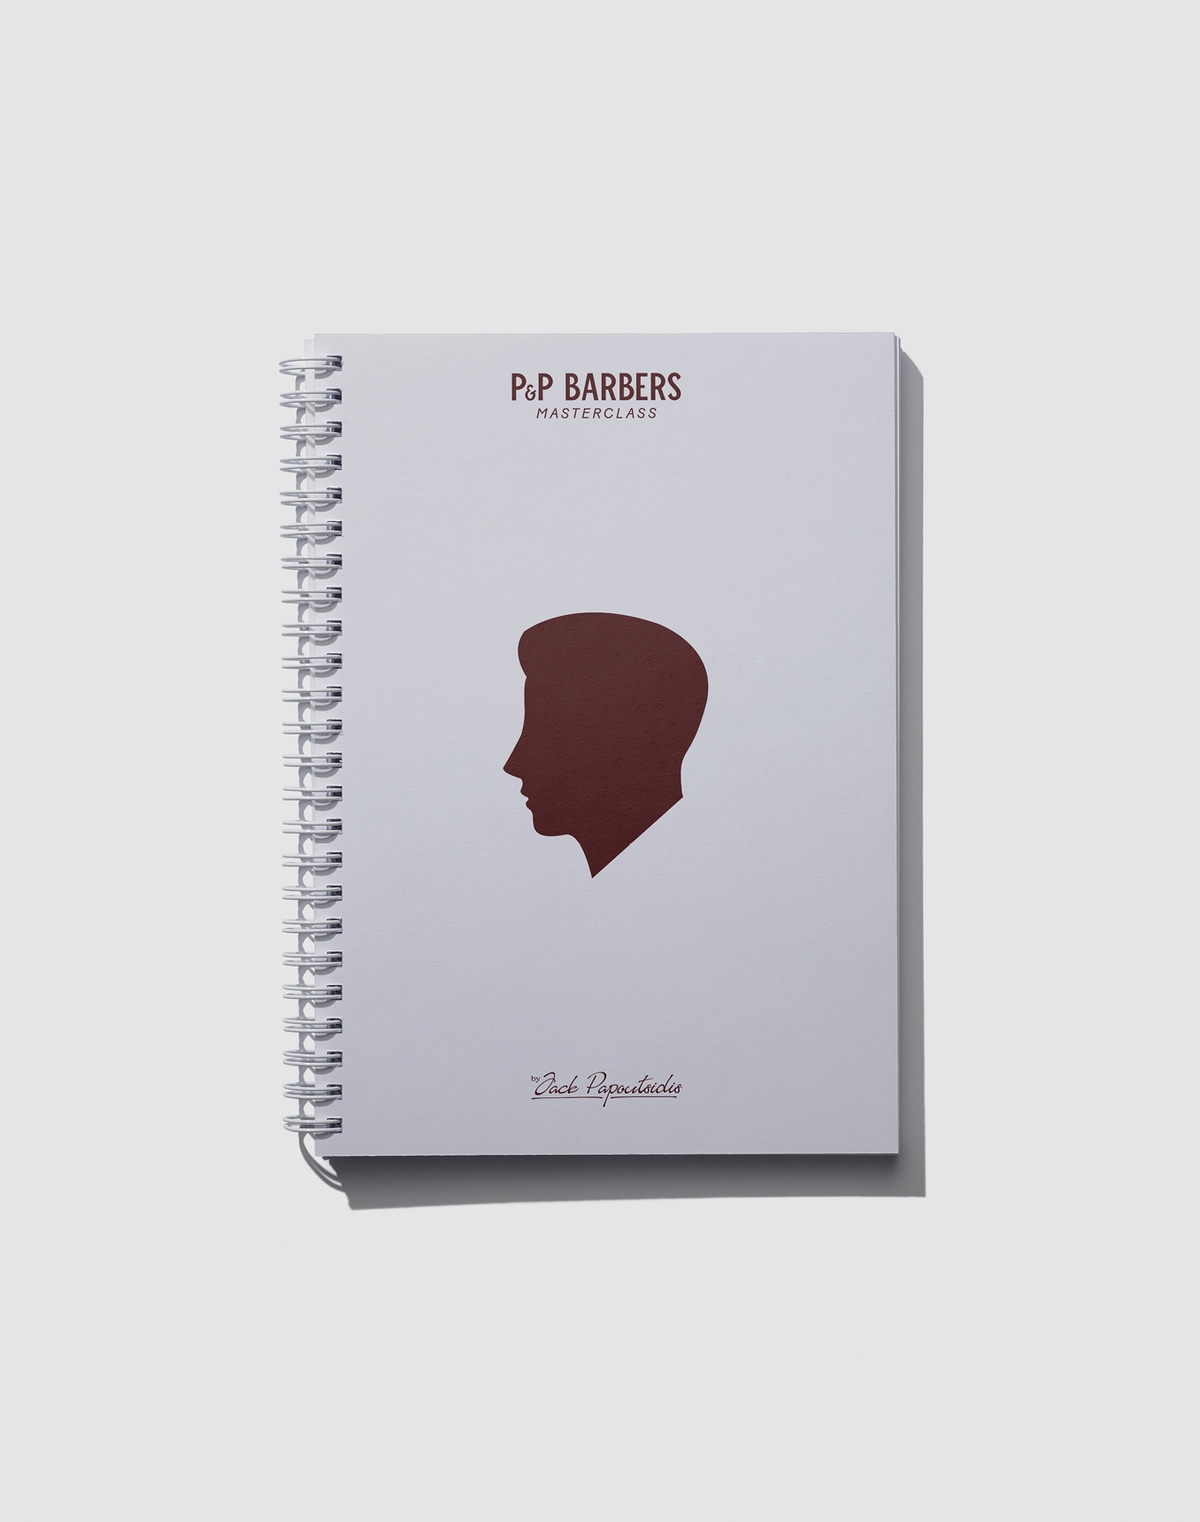 PP Barbers - Identity Ring Bound Notepad - Men's Barbering | Atollon - a design company